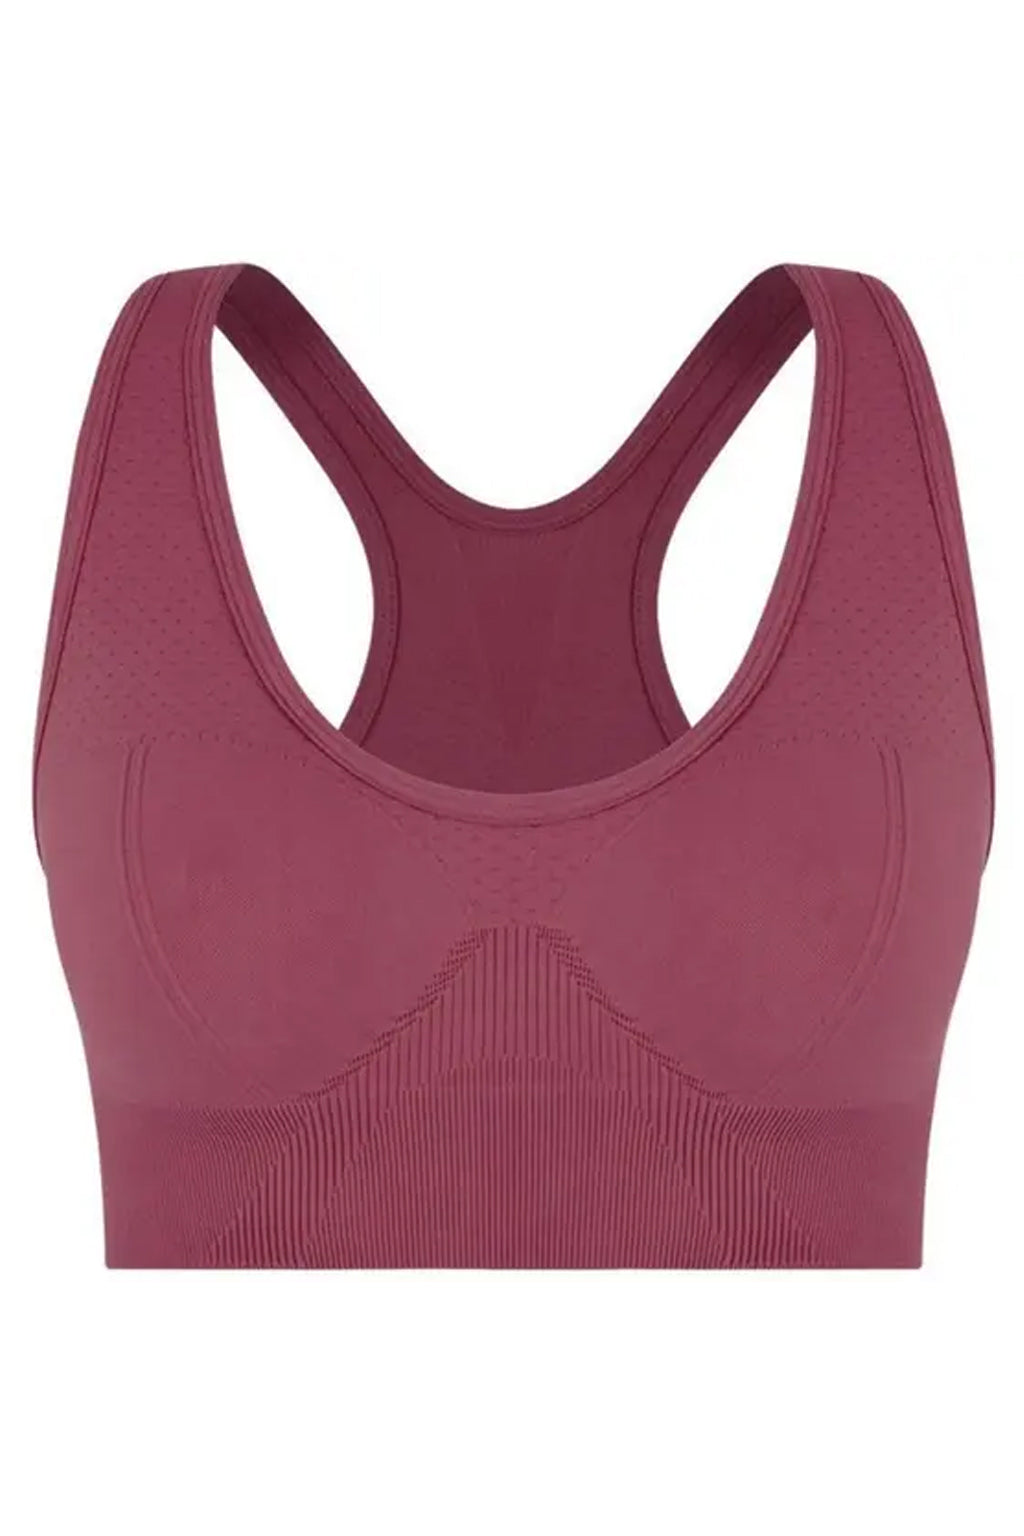 Control Technology Top Extra Support Bra - METRO BRAZIL